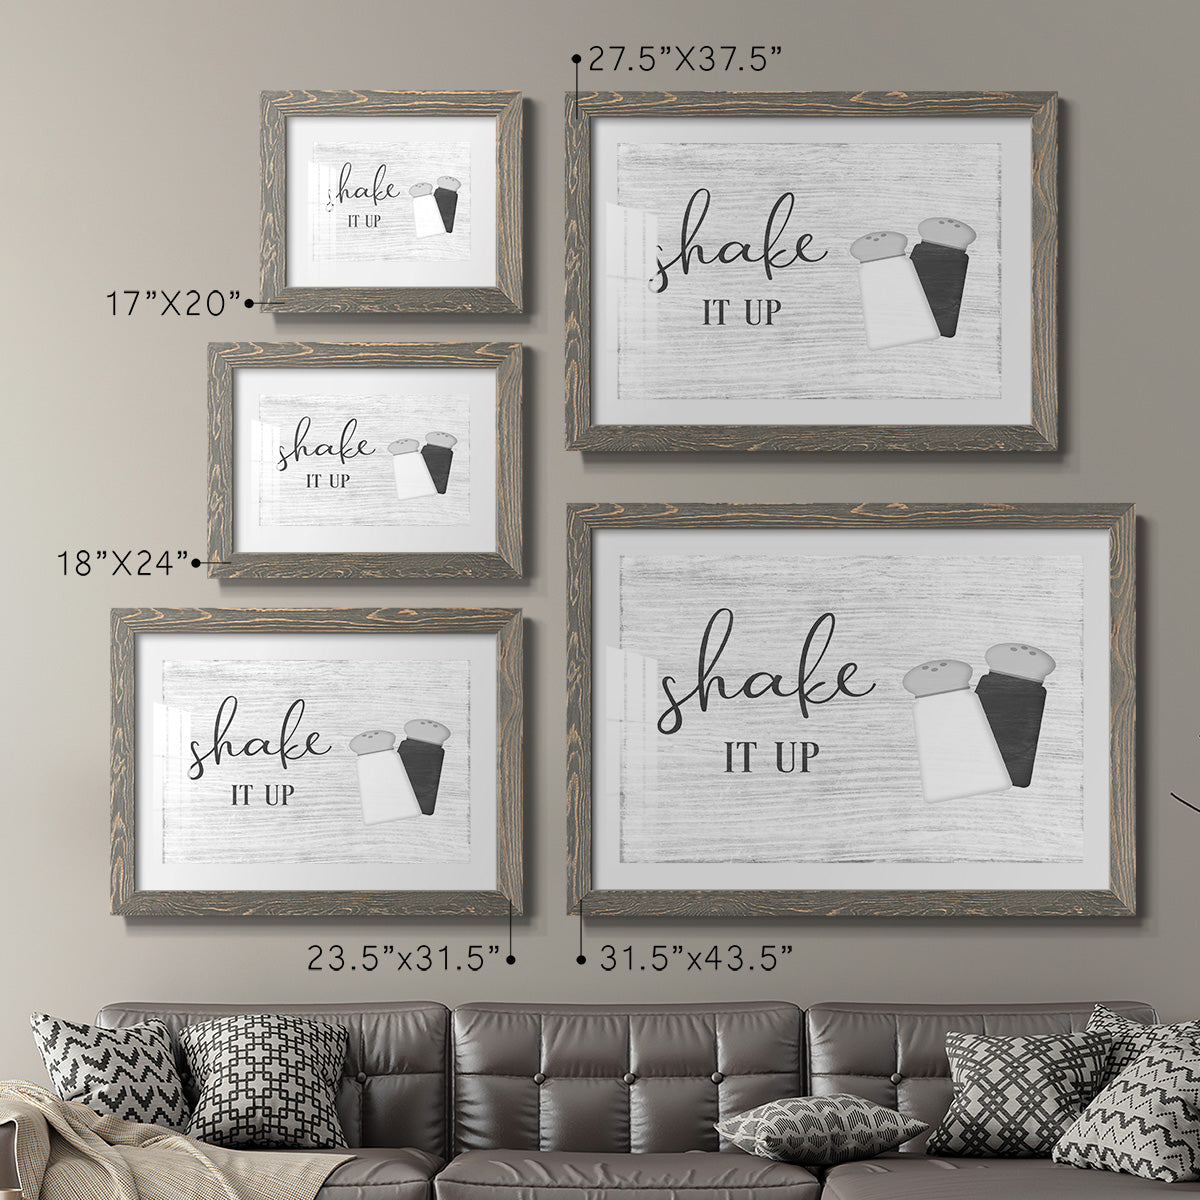 Shake it Up-Premium Framed Print - Ready to Hang